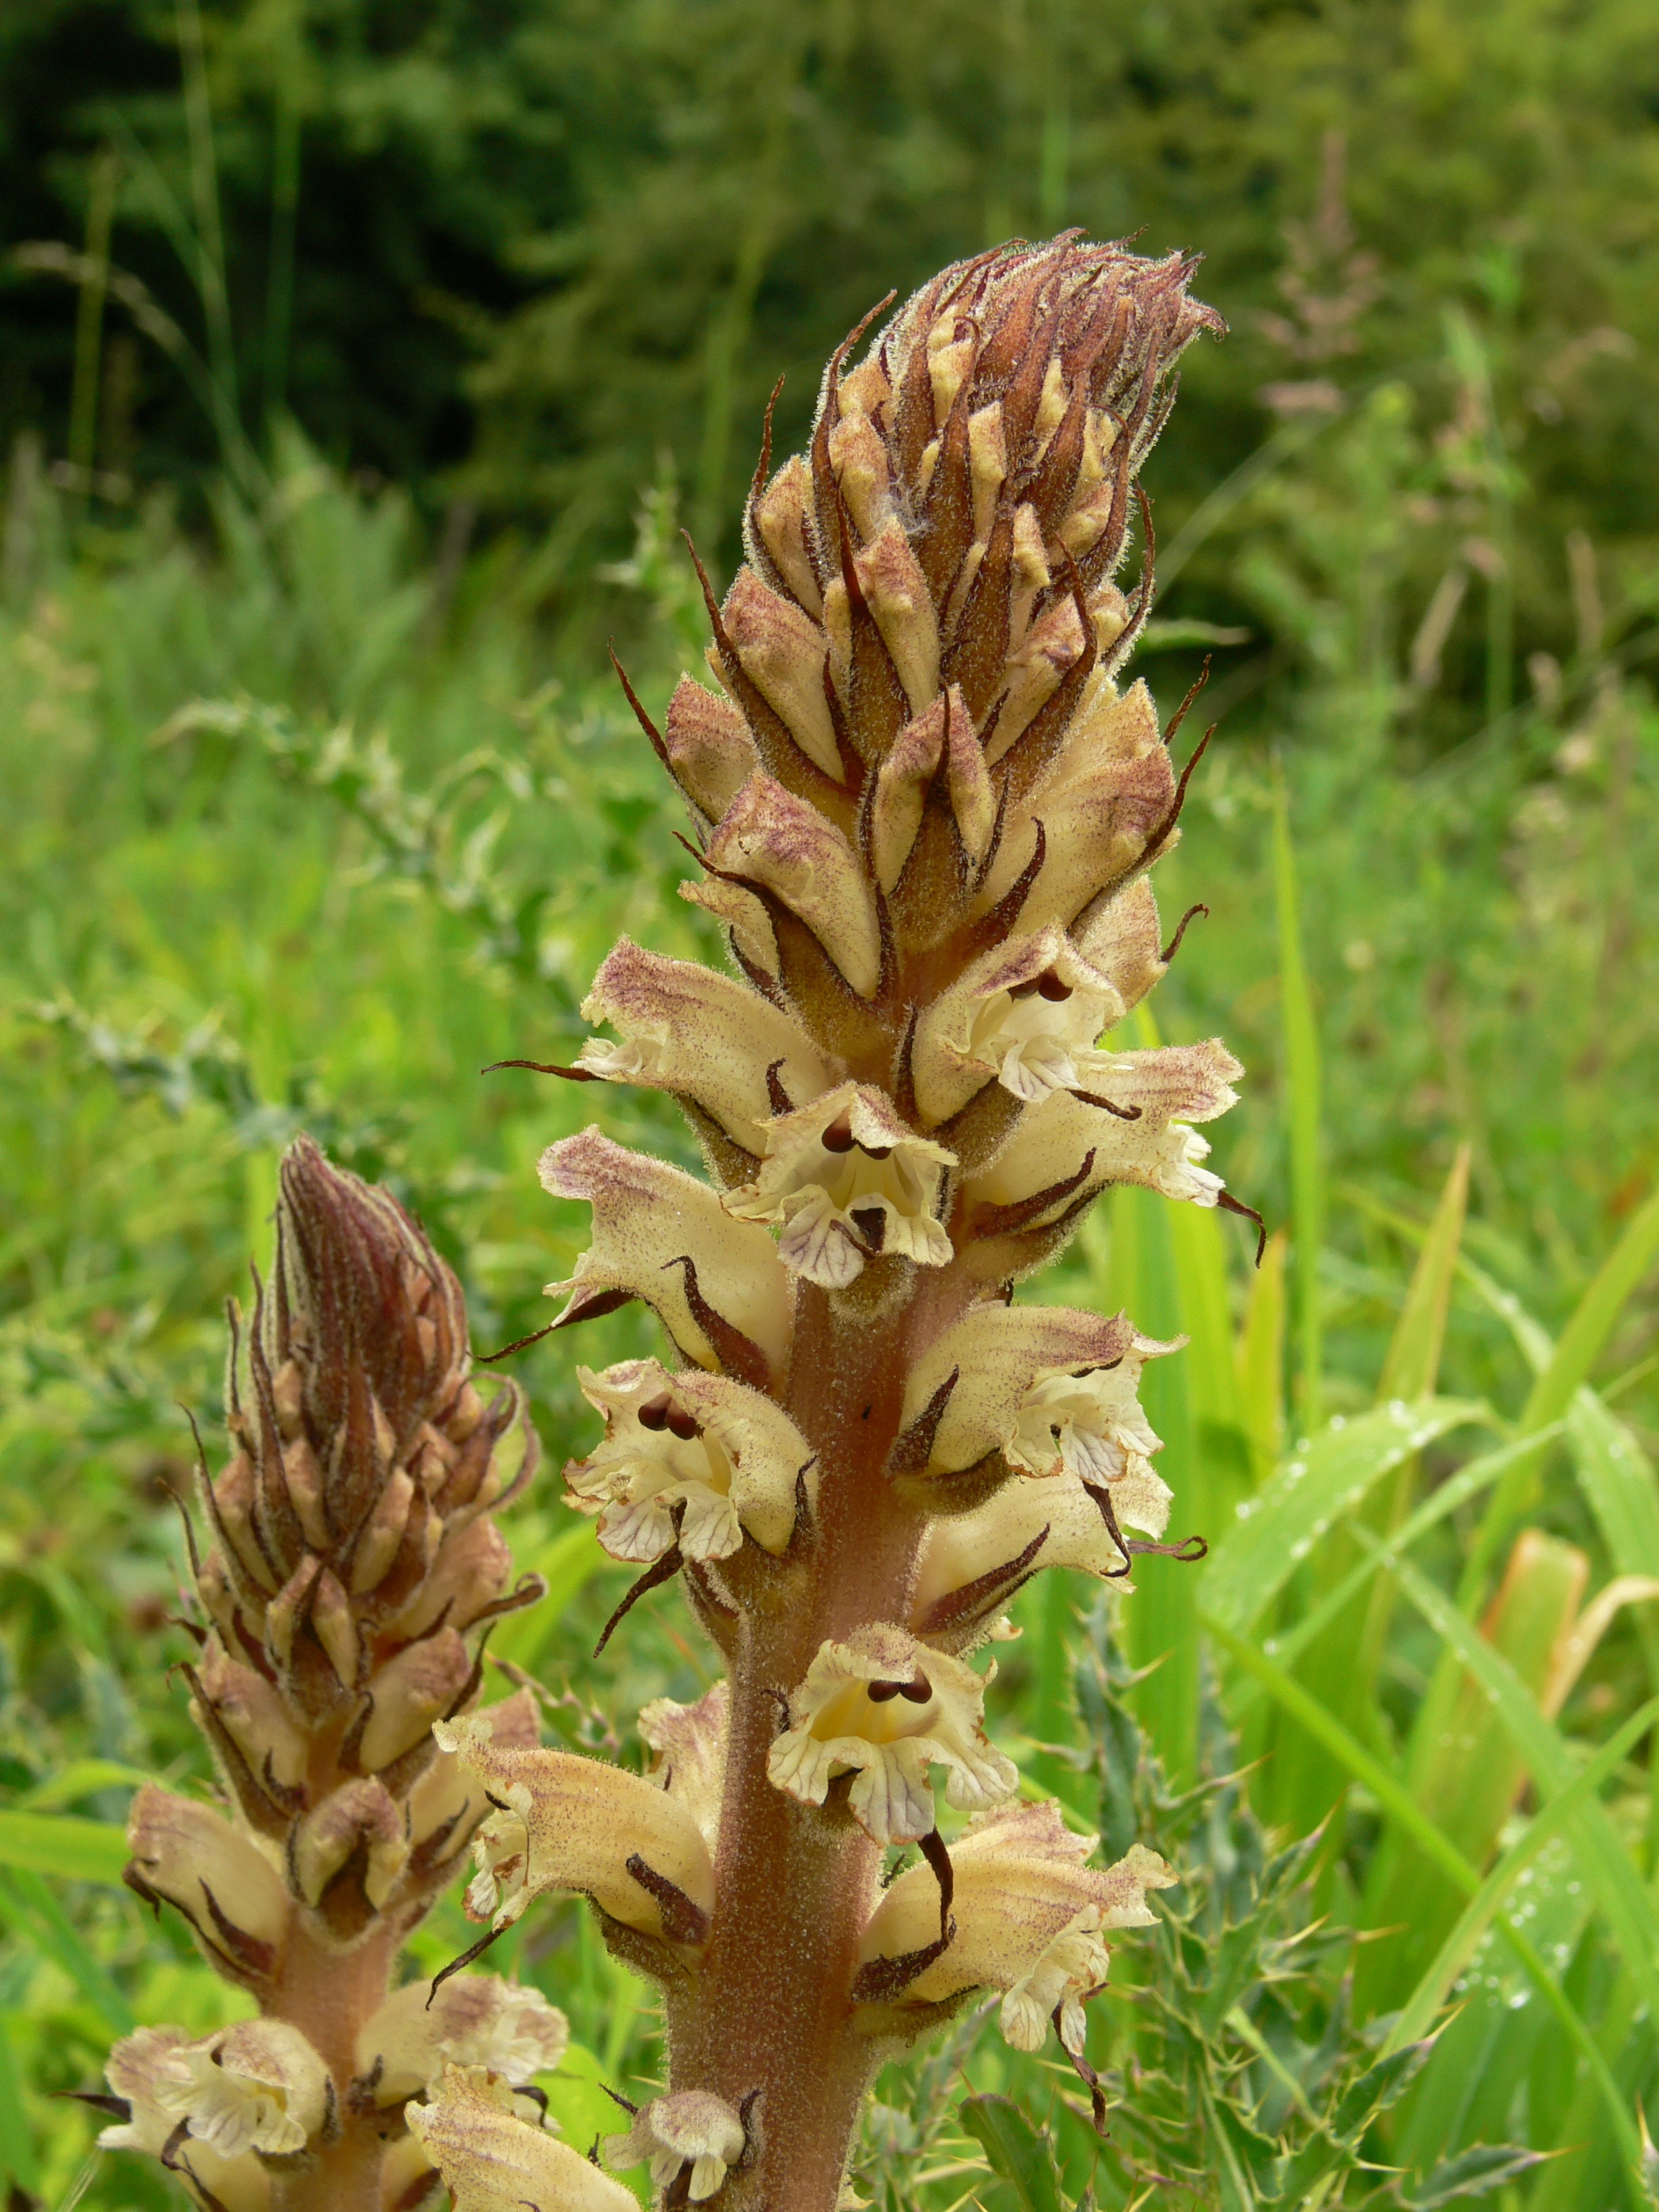  Thistle Broomrape, Orobanche reticulata, is parasitic upon thistles; usually Creeping Thistle but in the wood has been found also on Spear Thistle. It is rare and is found only in Yorkshire at about 12 sites; hence its other common name of Yorkshire Broomrape.